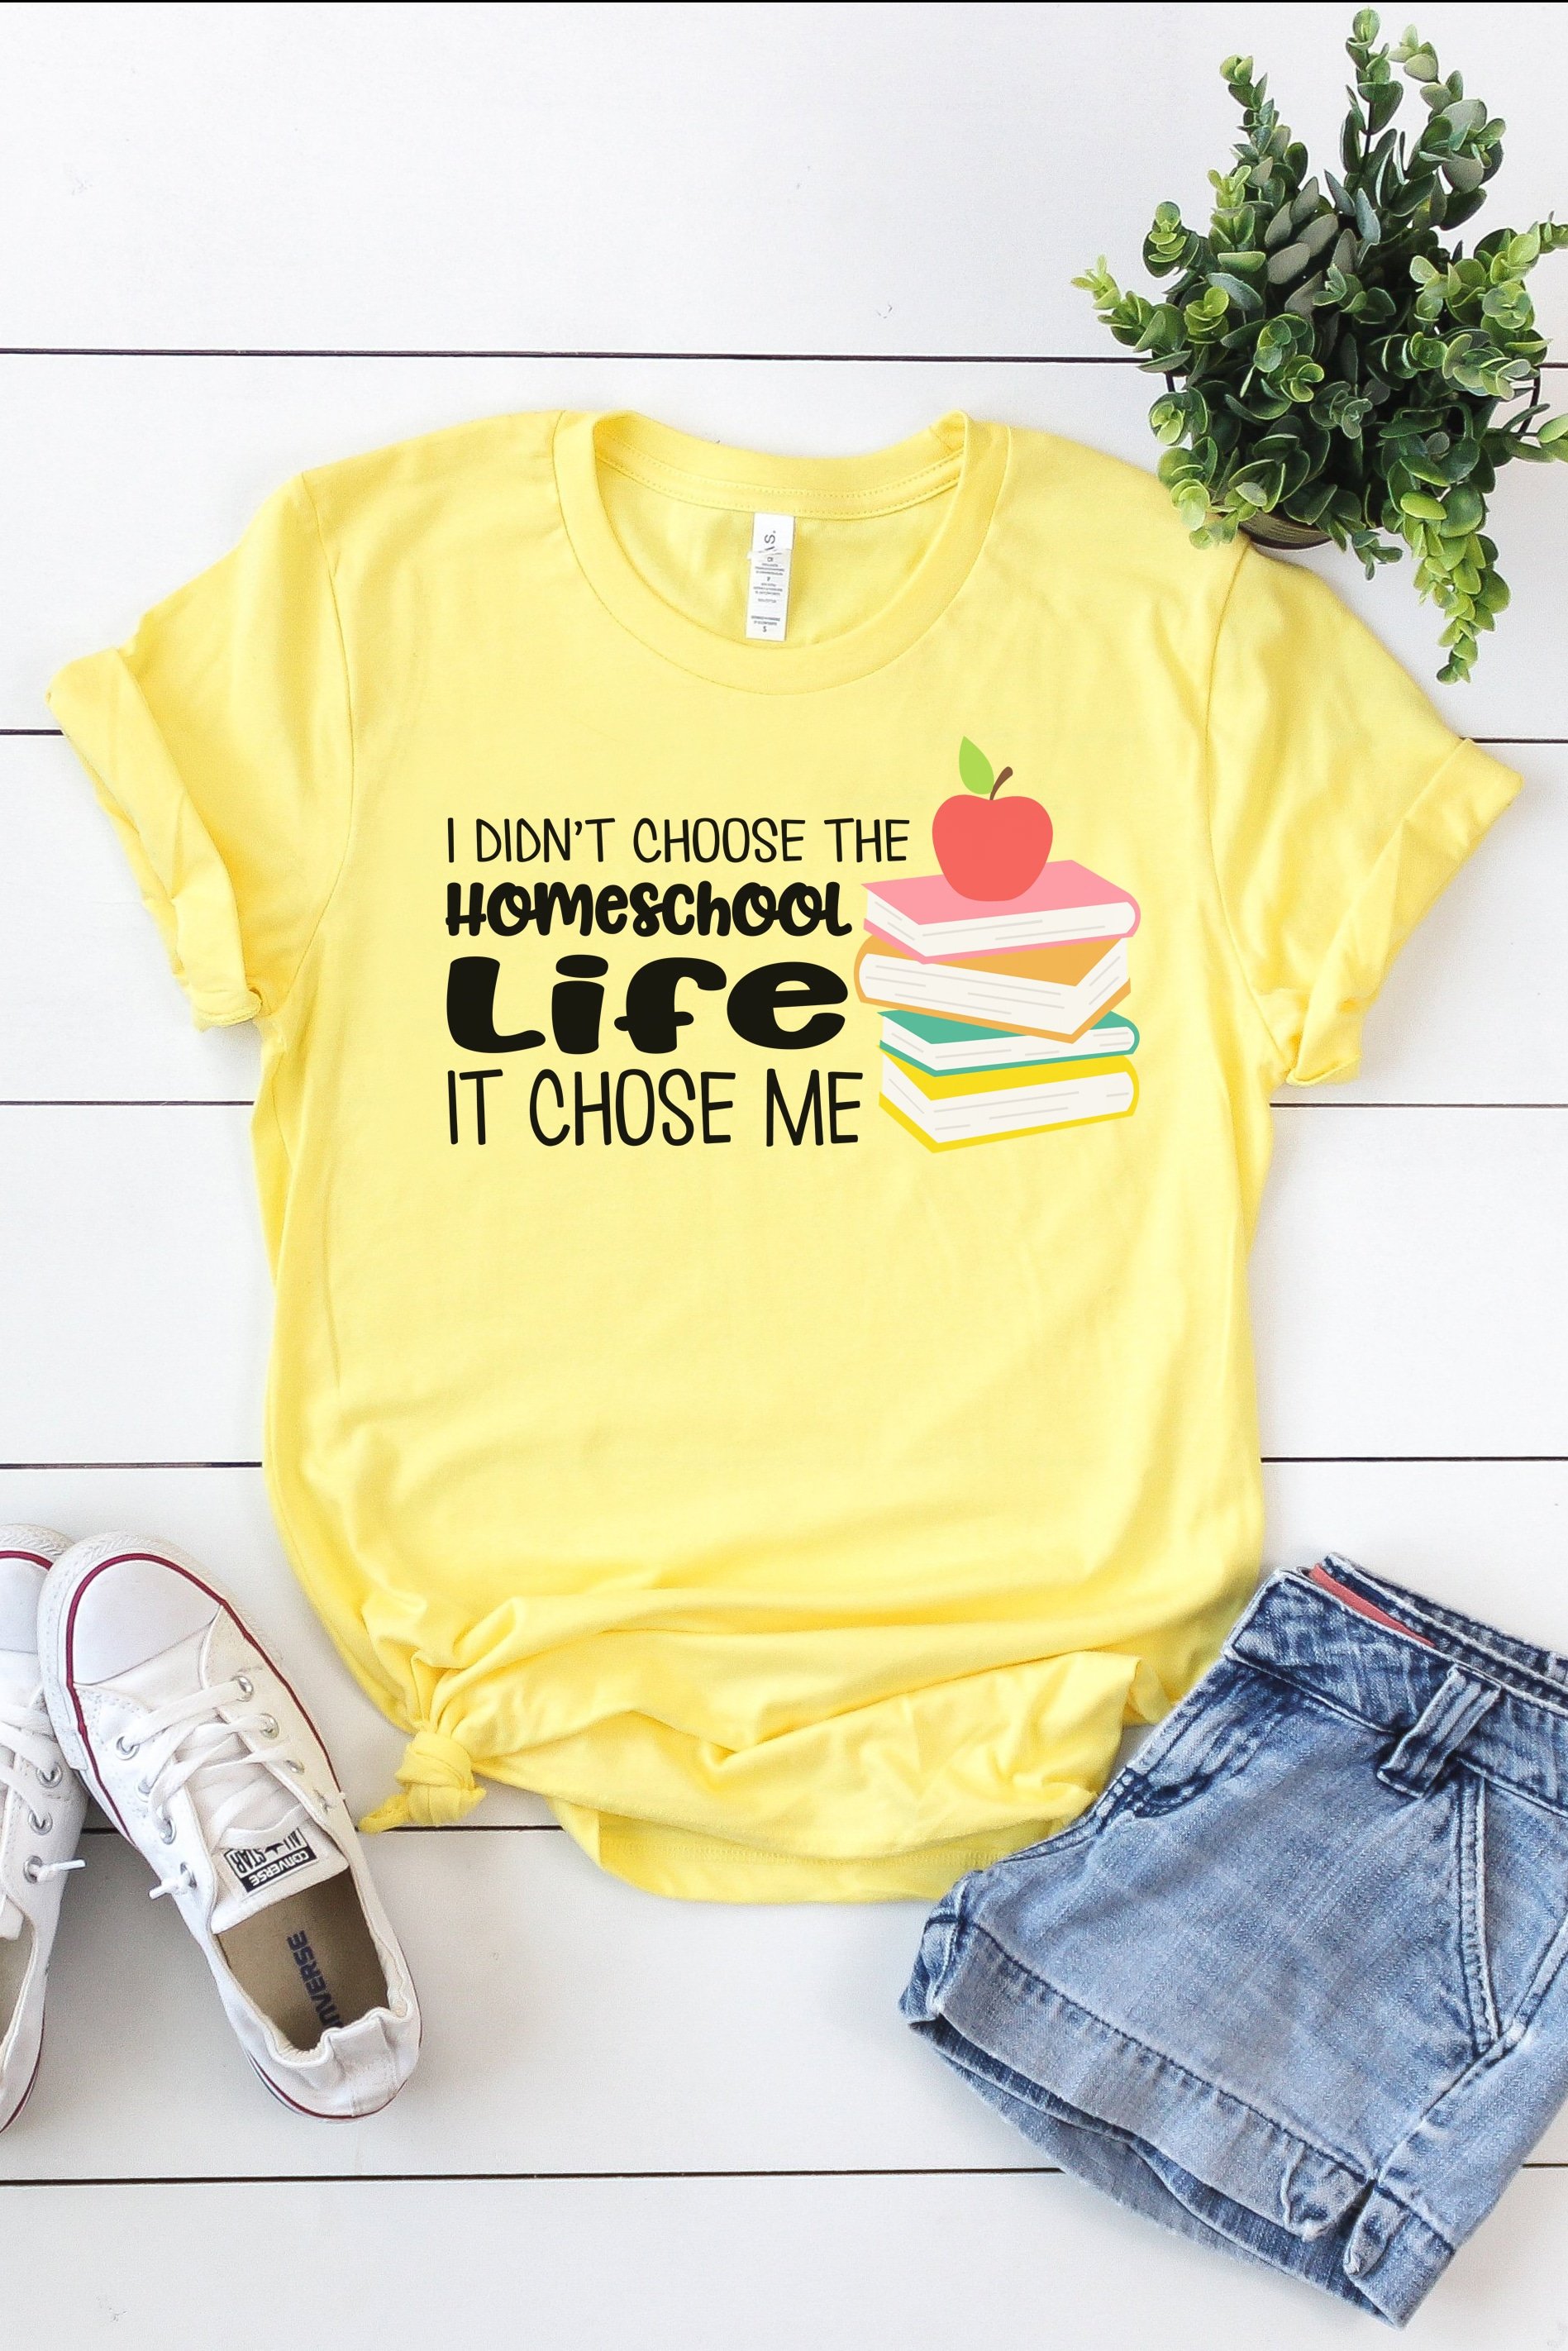 homeschool life svg file on yellow shirt with accessories